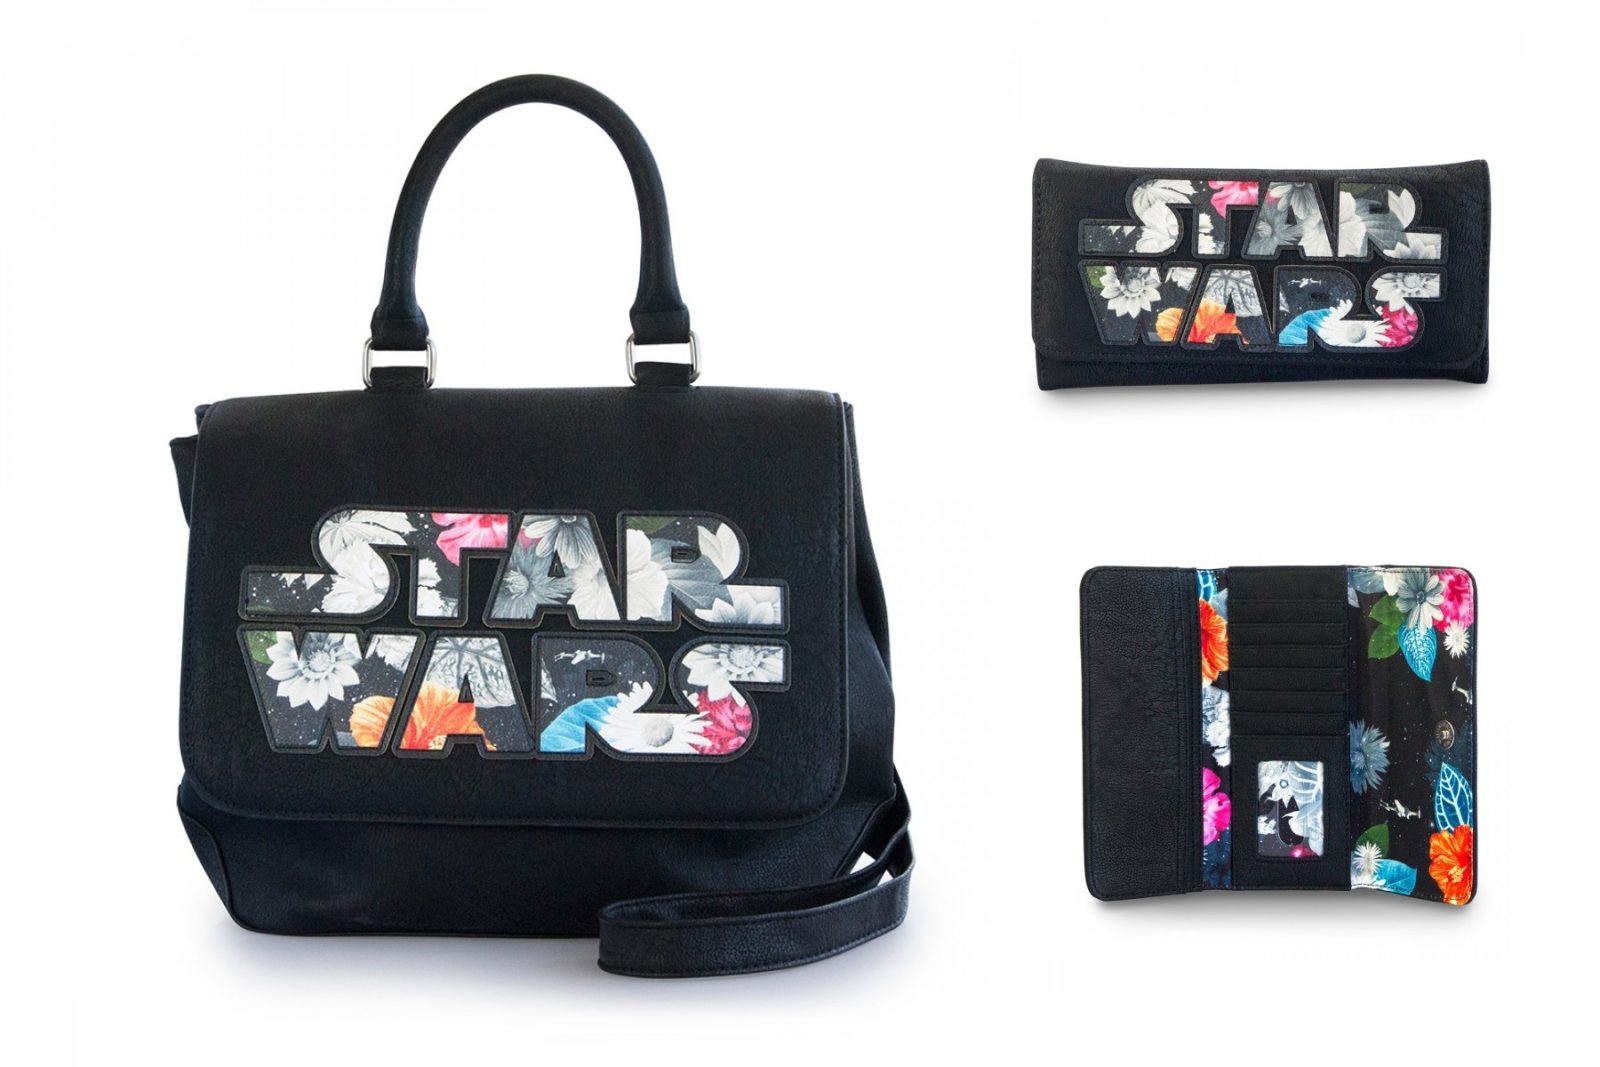 New Loungefly x Star Wars arrivals